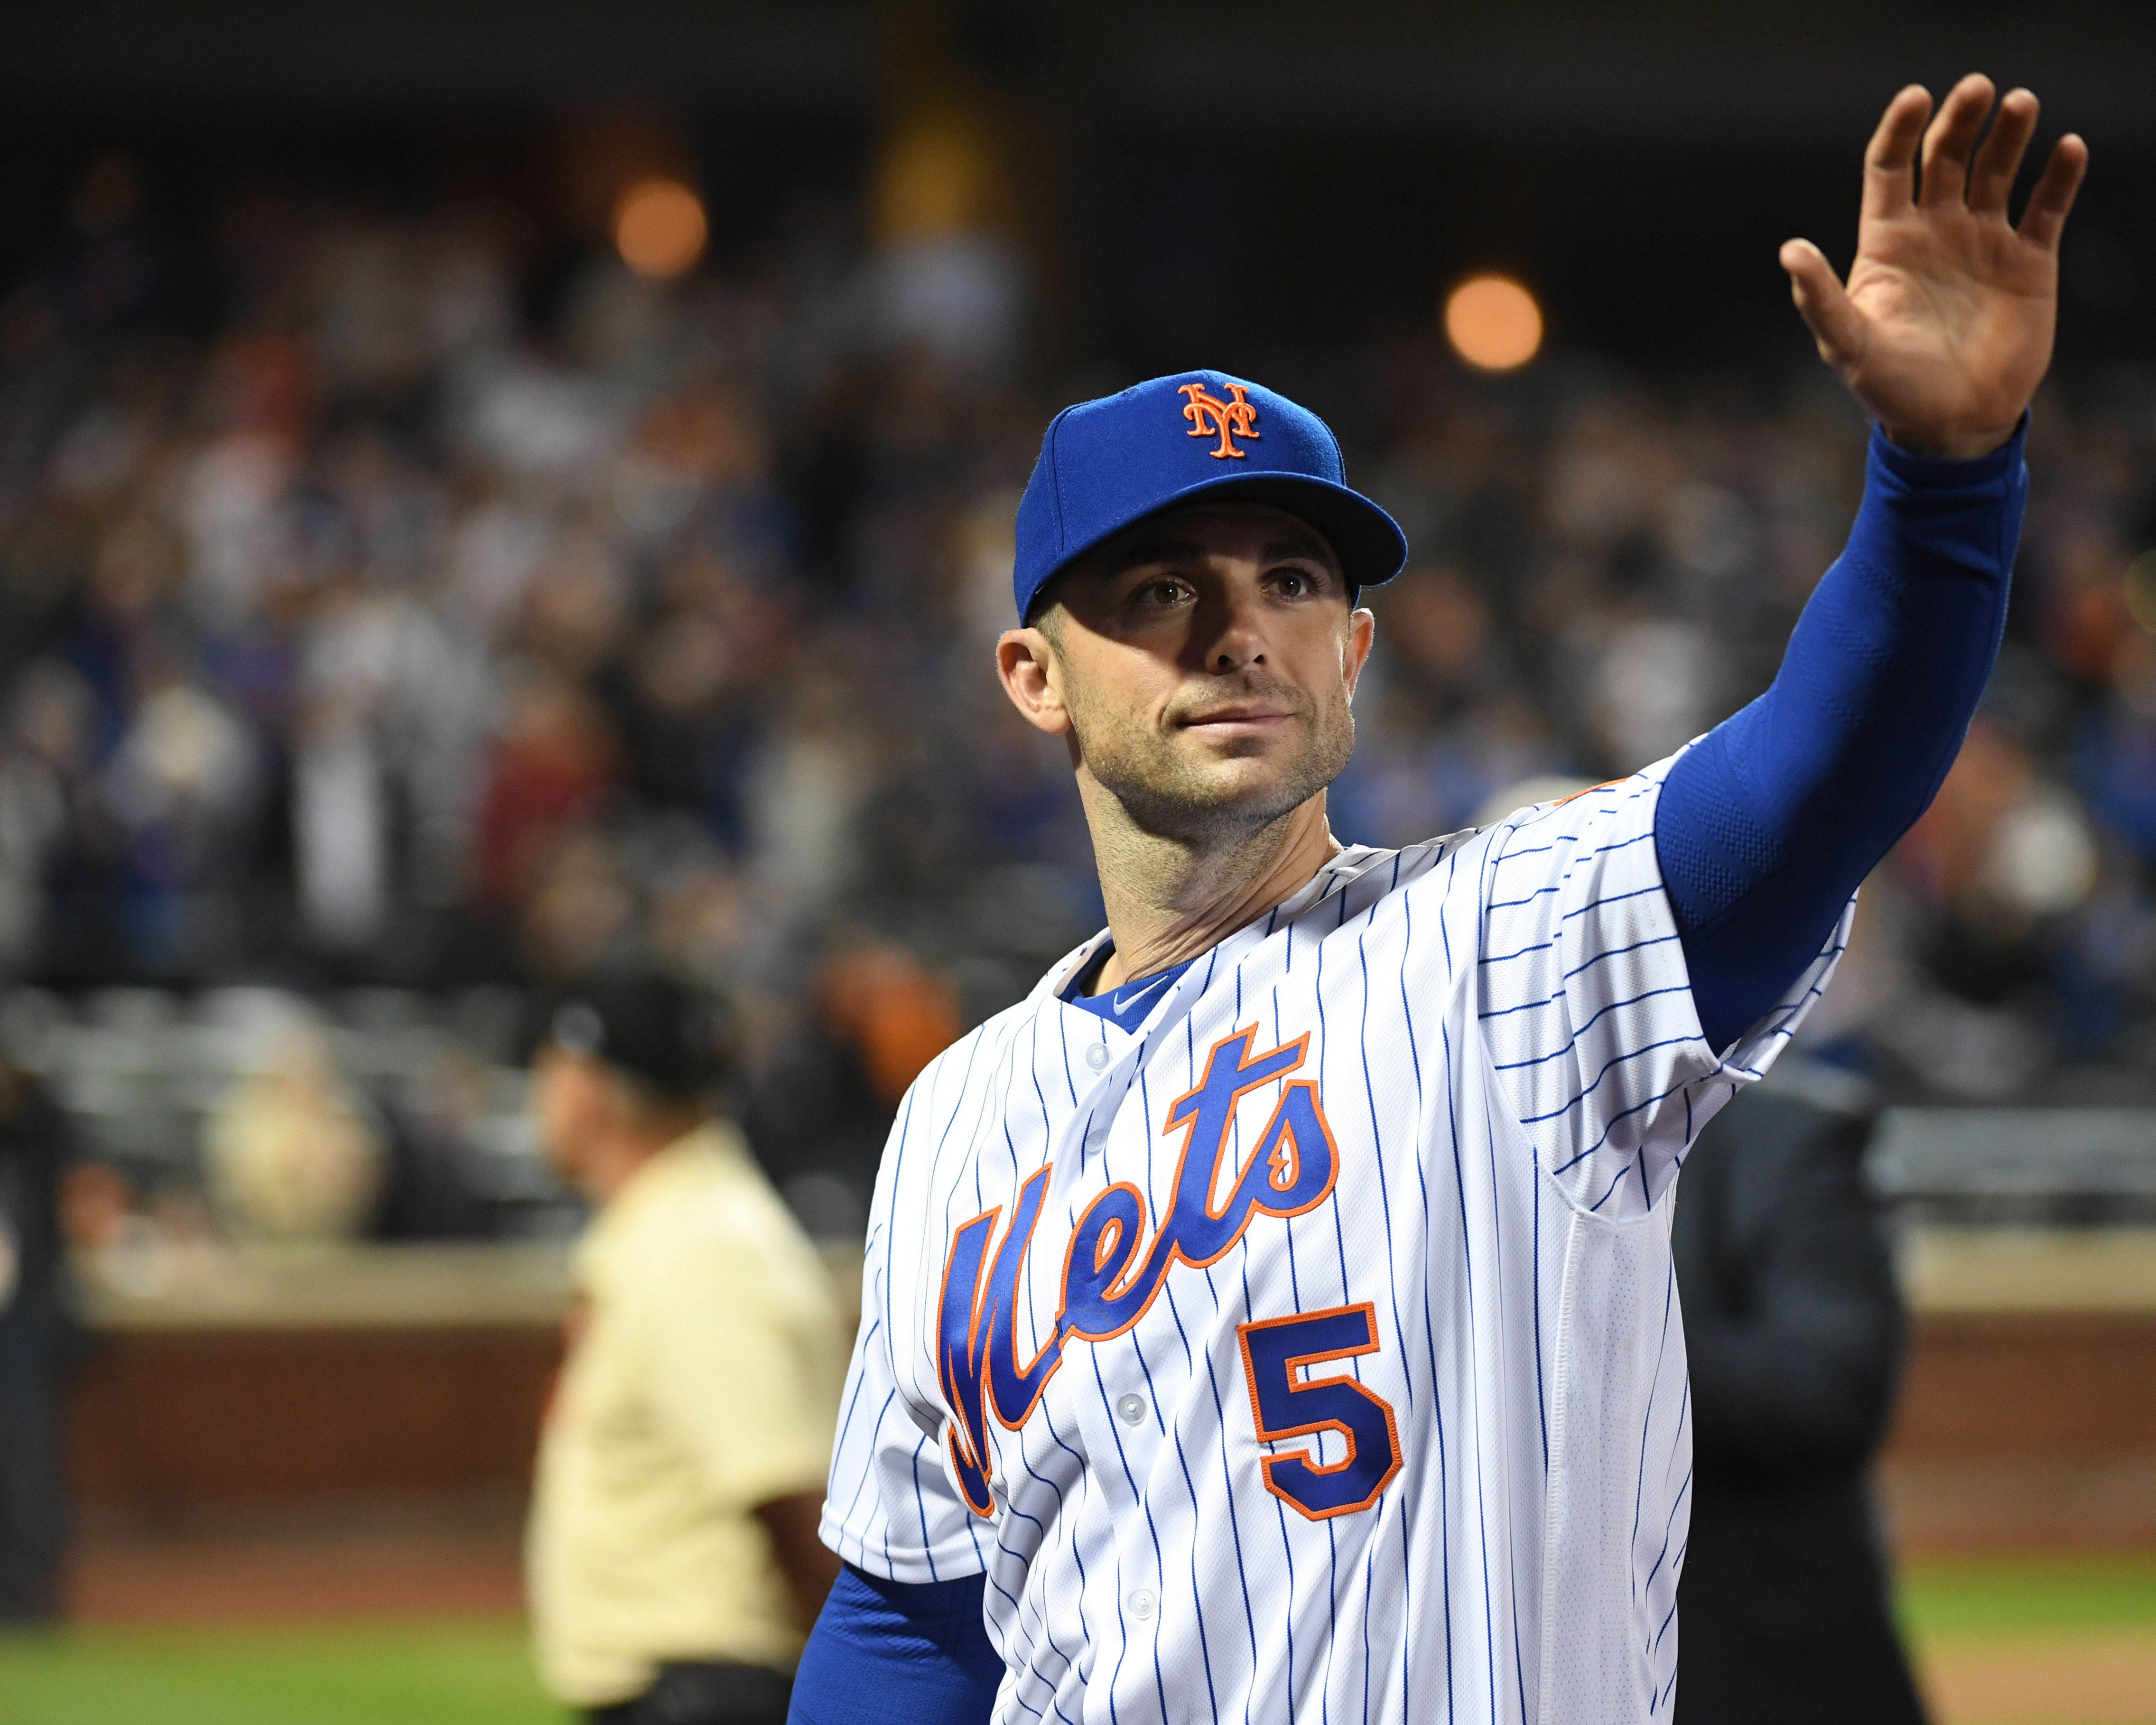 David Wright Waves to Fans